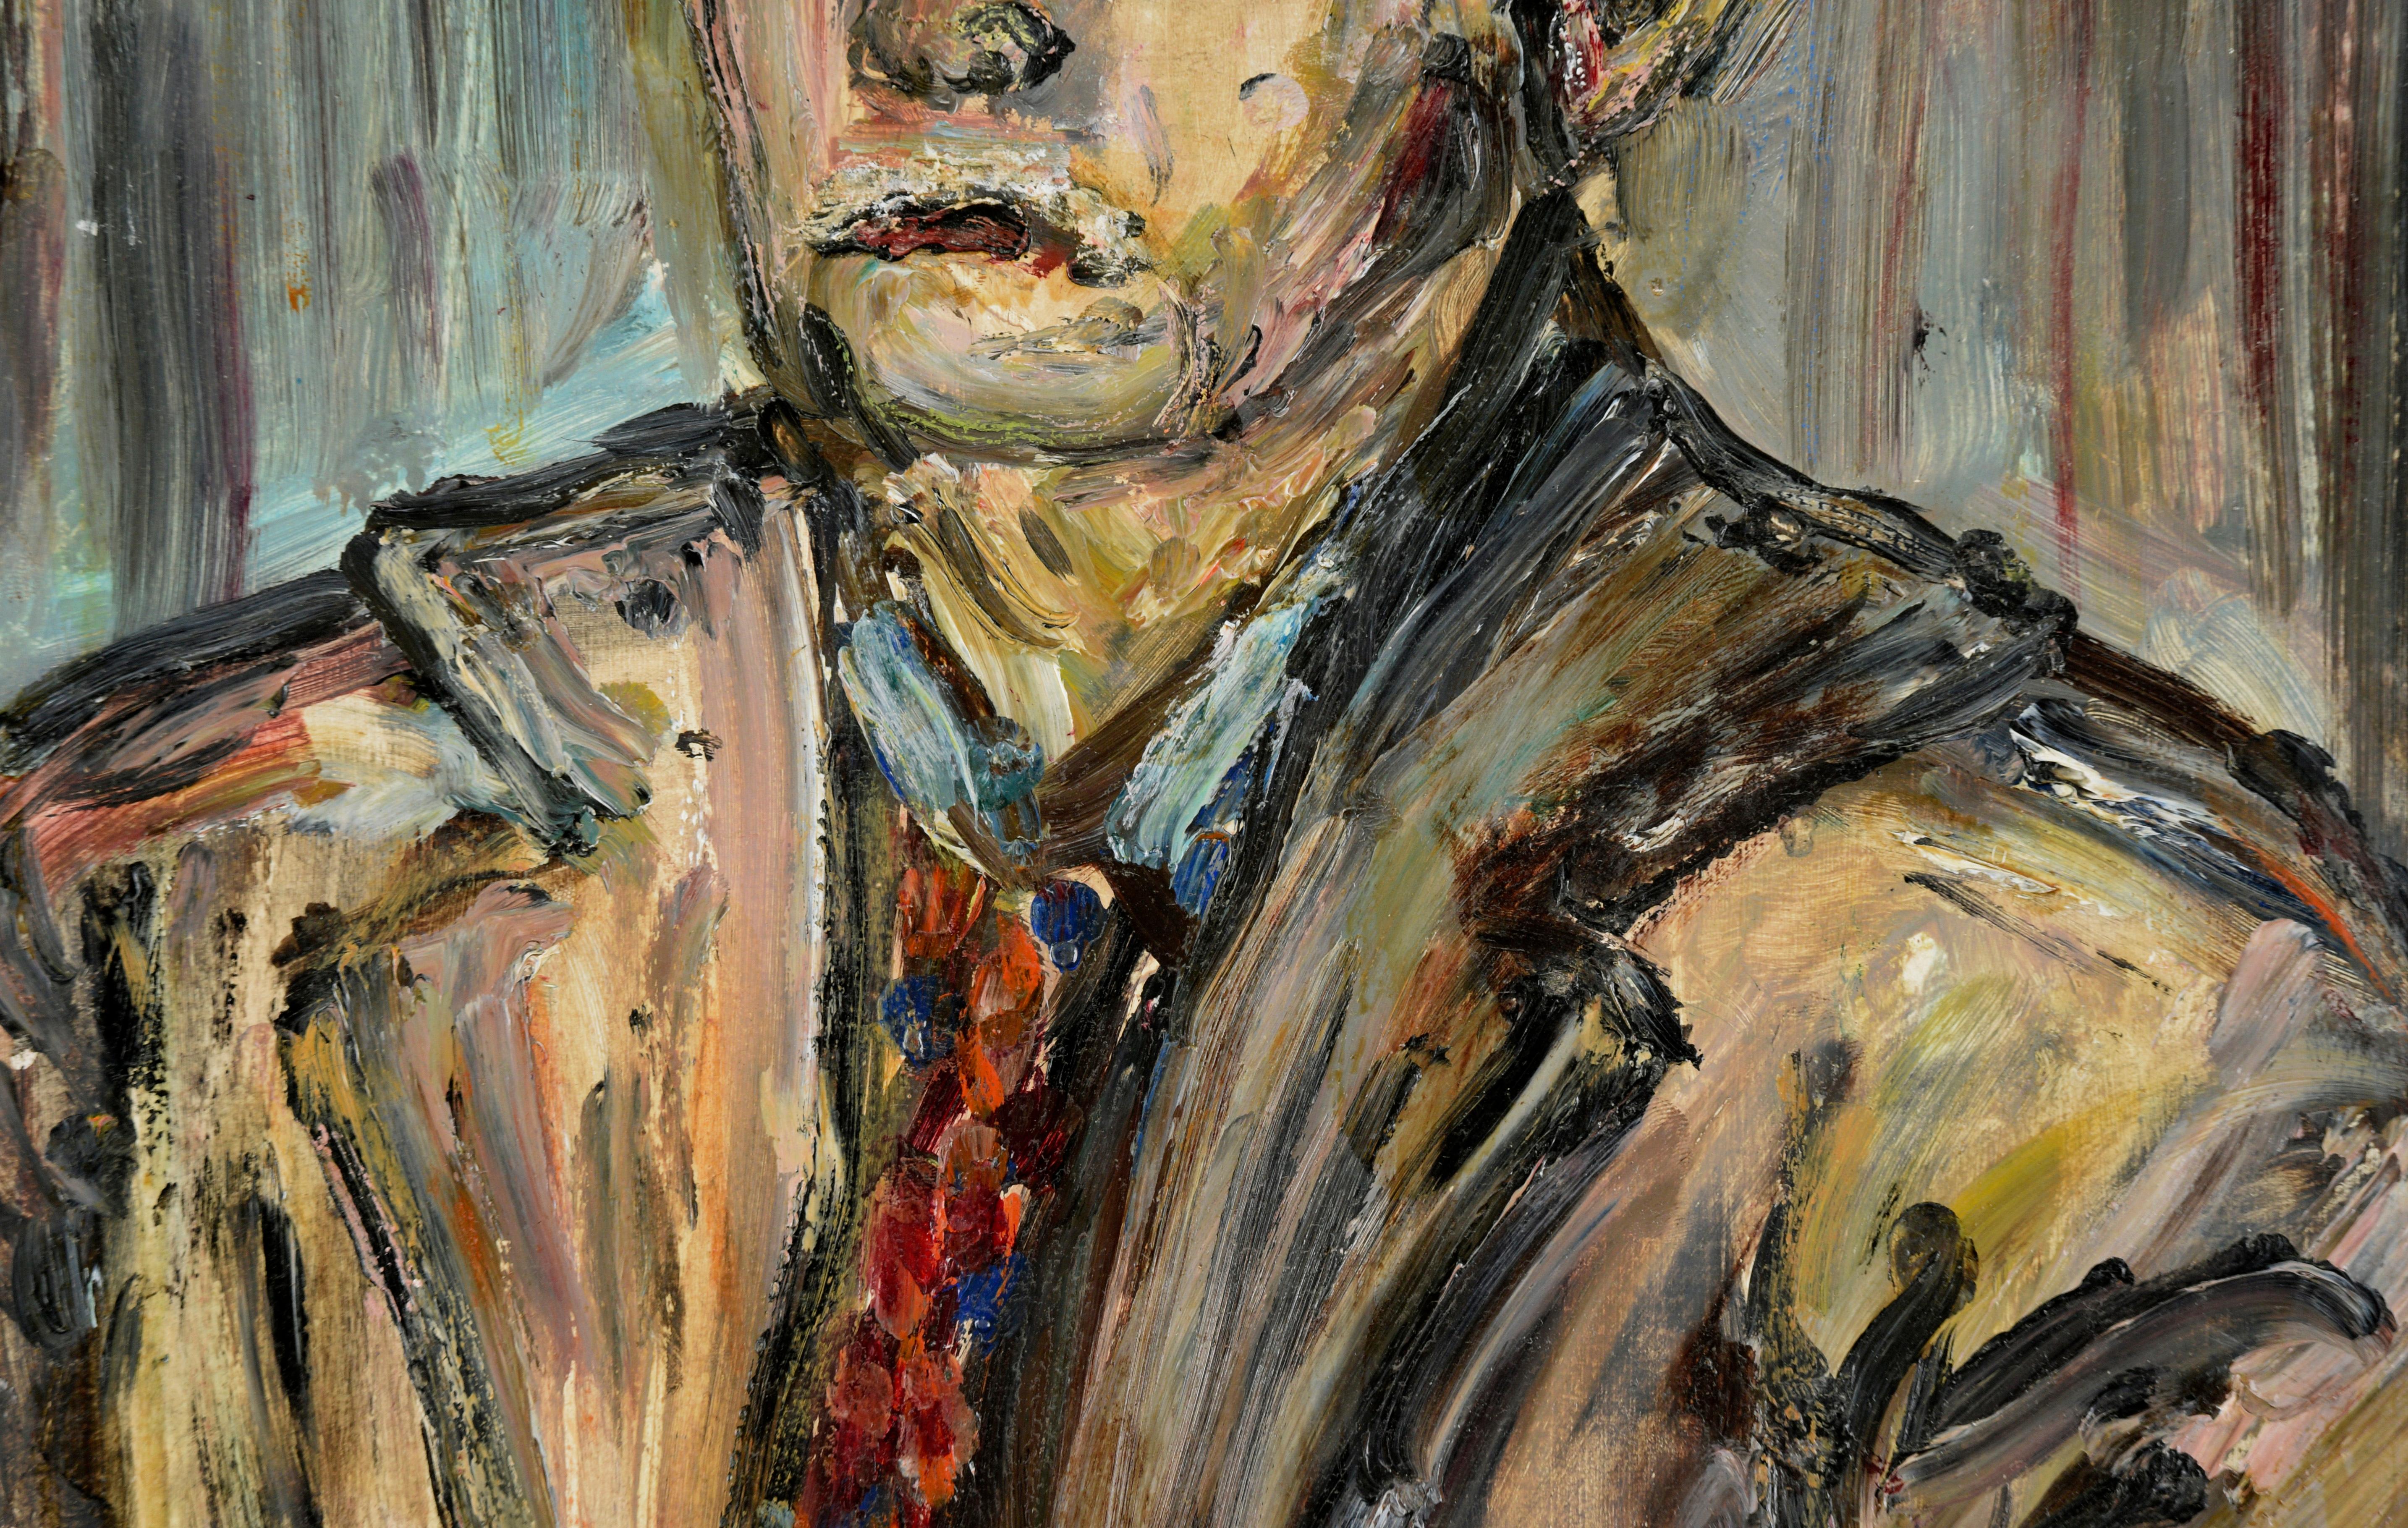 Mid Century Modern Portrait of a Man in a Suit in Oil on Masonite - Post-Impressionist Painting by Honora Berg